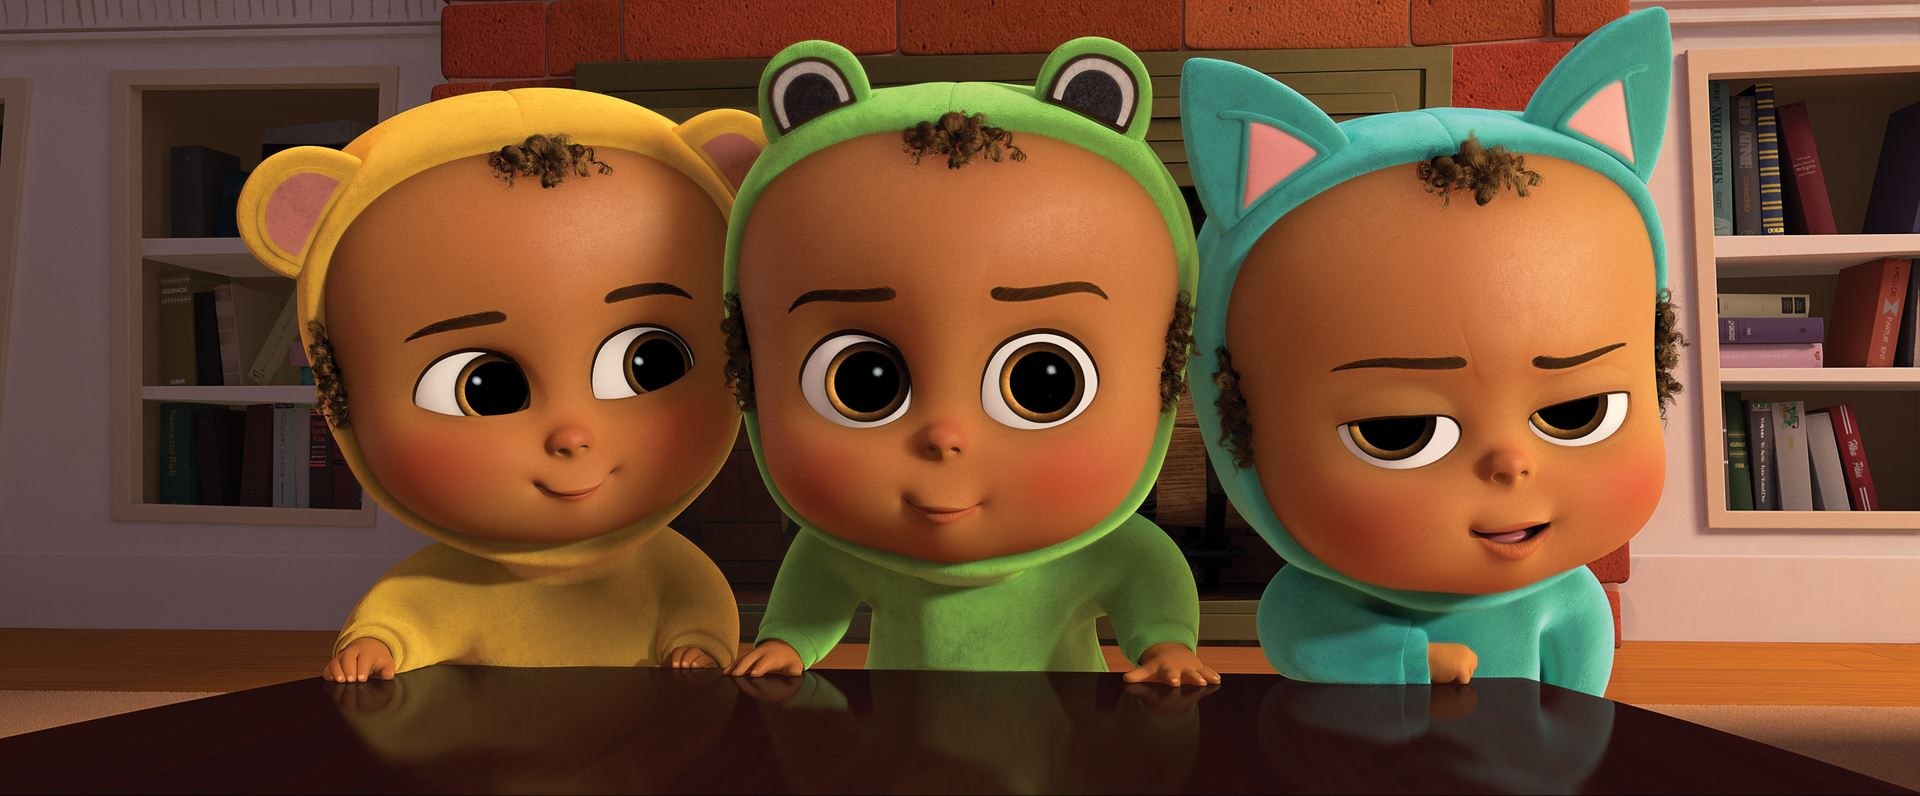 how to stream the new boss baby movie